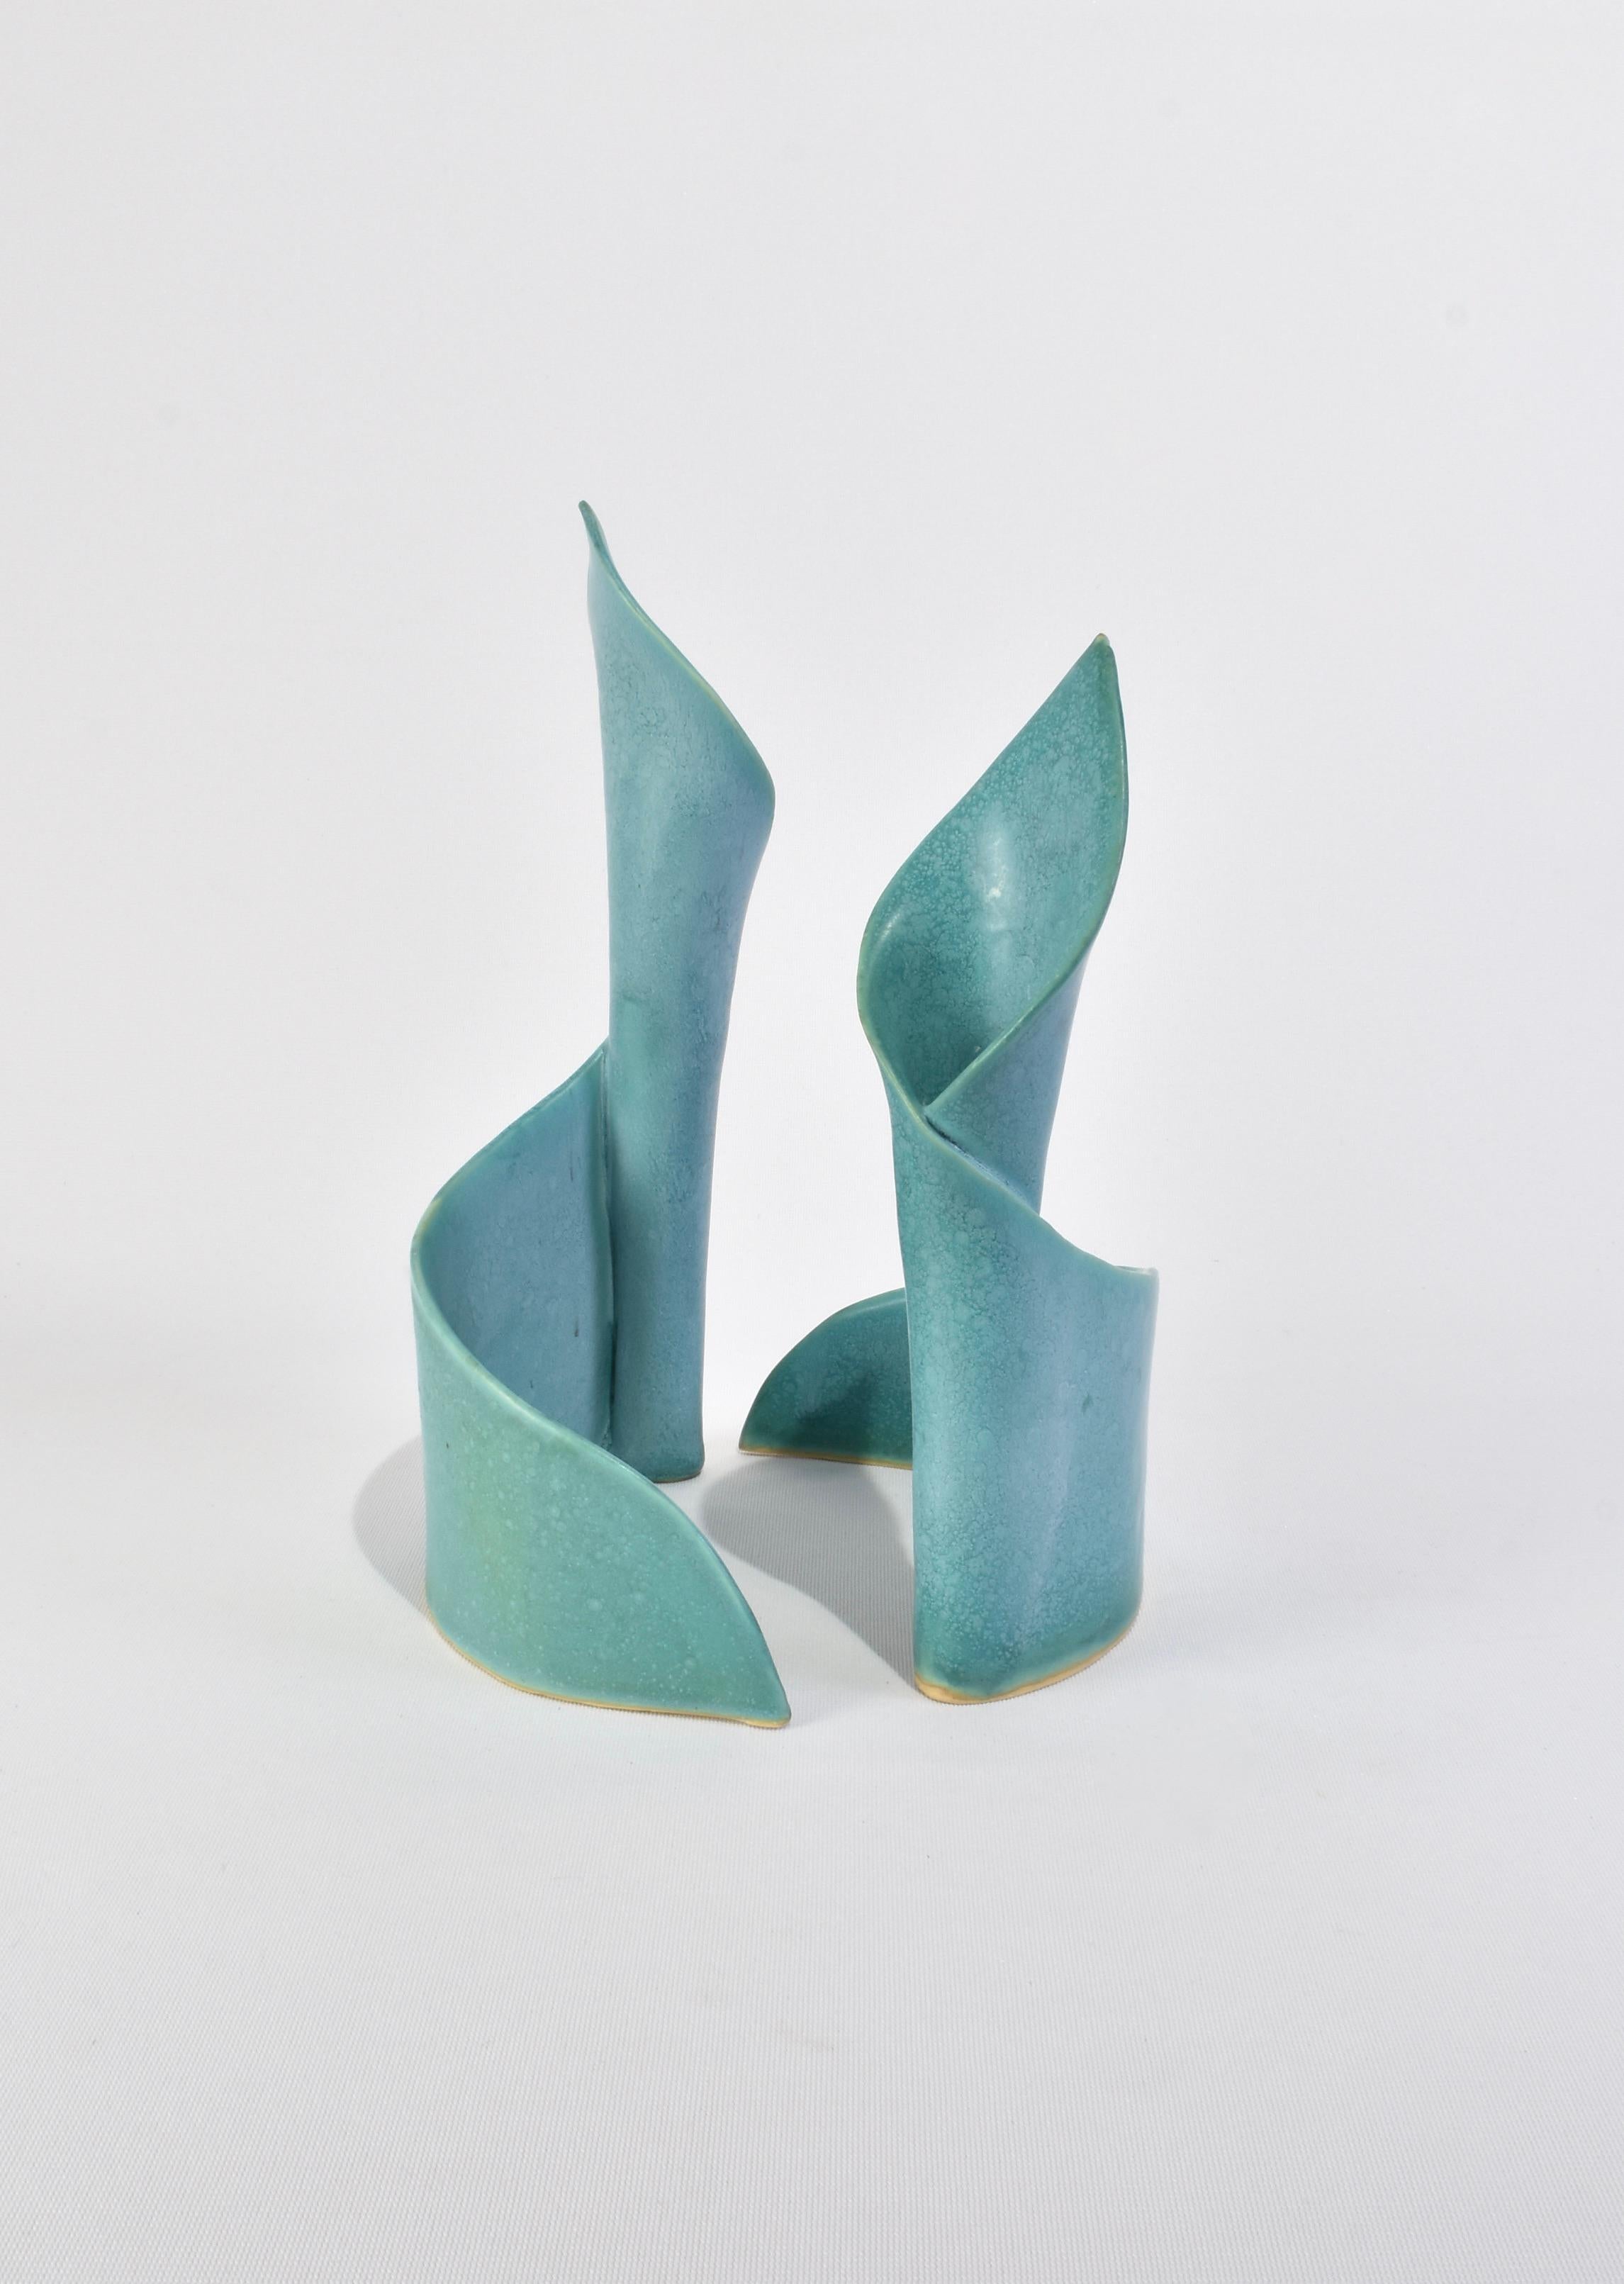 Stunning, handmade aqua ceramic candleholder set in a curved shape reminiscent of a calla lily.